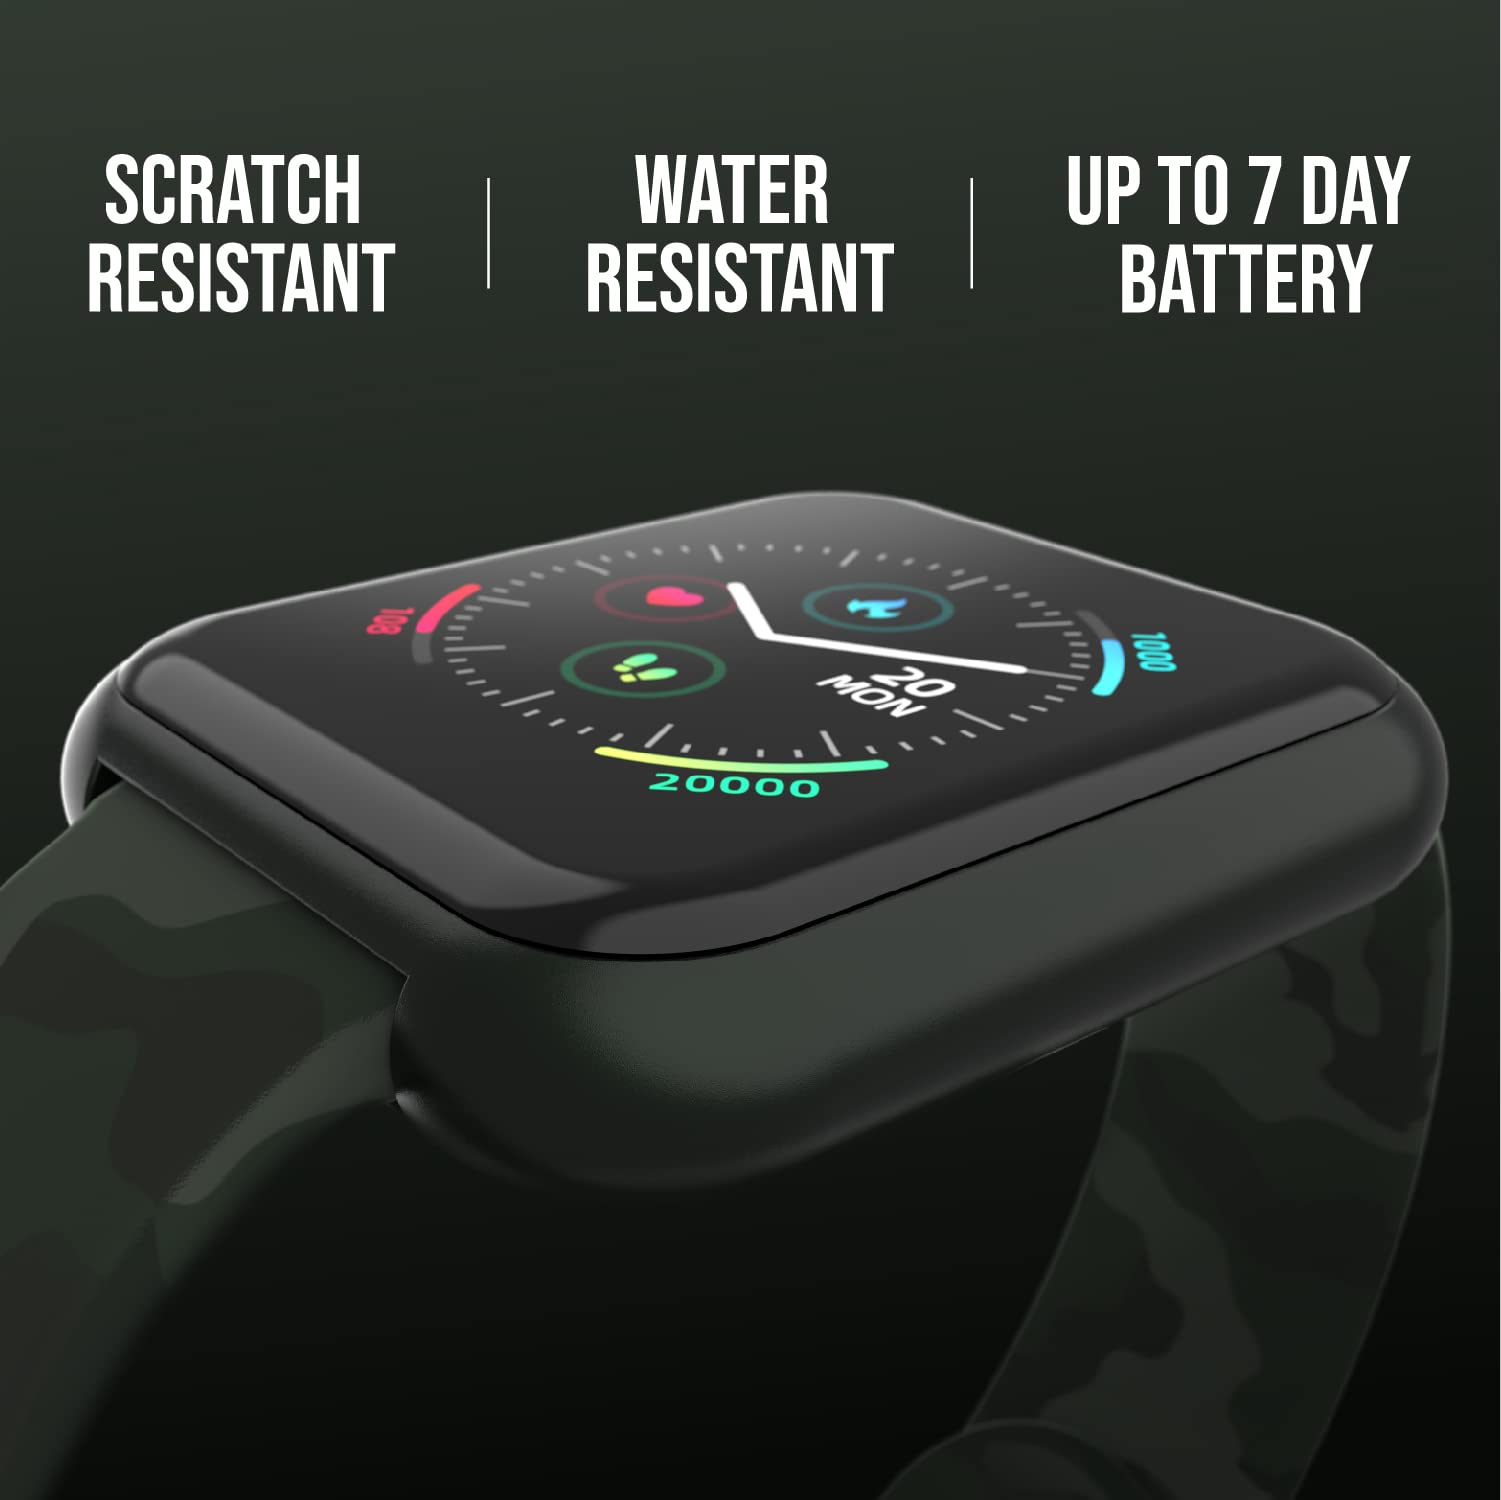 iTouch Air 3 Smartwatch Fitness Tracker with Heart Rate Tracker, Step Counter, Notifications, Sleep Monitor for Men Women